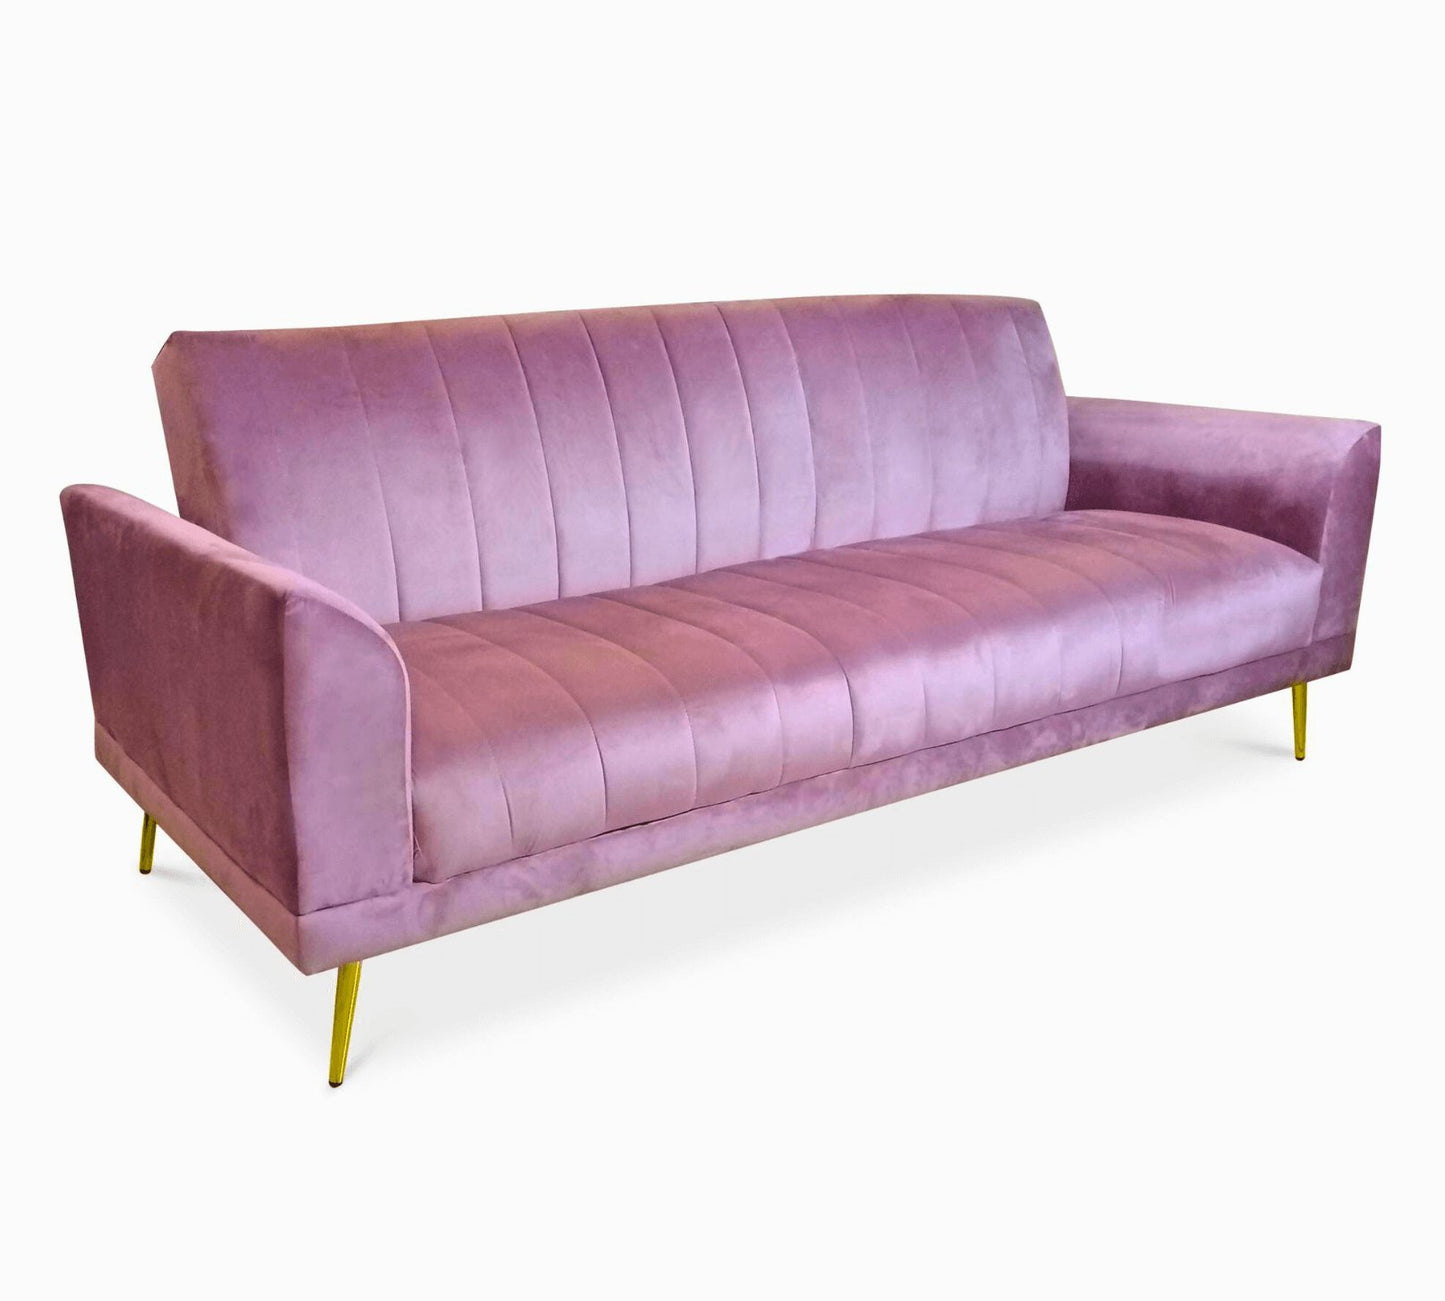 Retro Sleeper Couch (Double bed) - That Couch Place